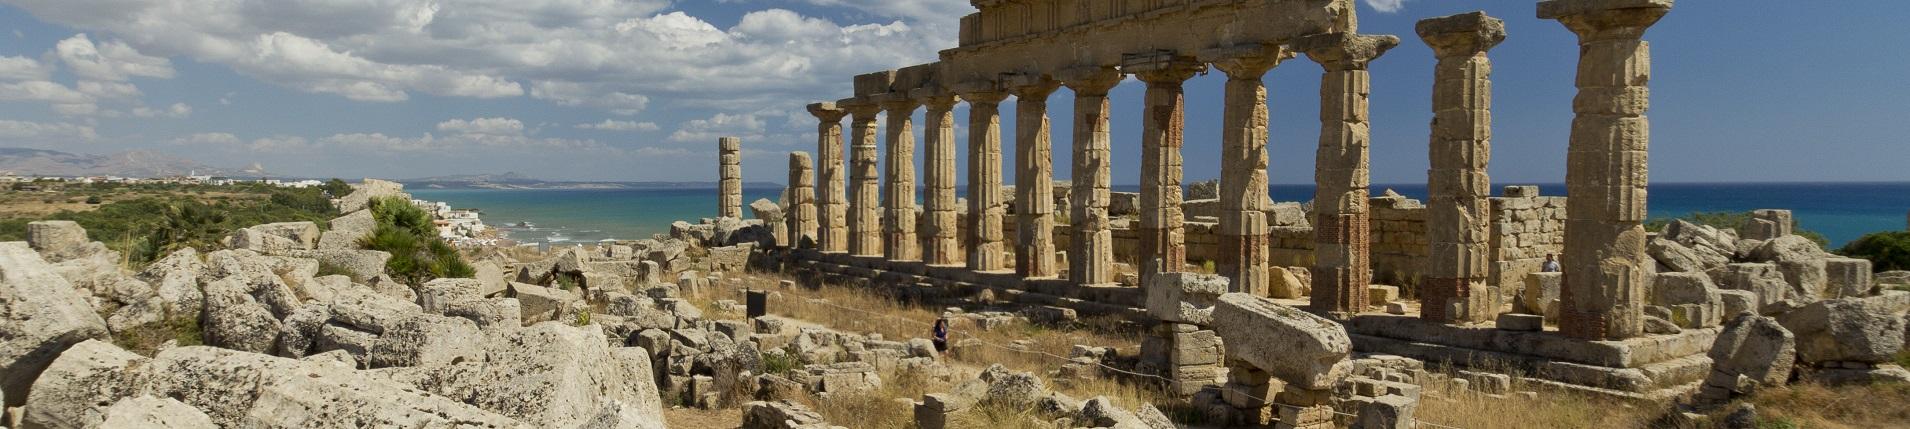 Villas in Sicily for culture-seekers